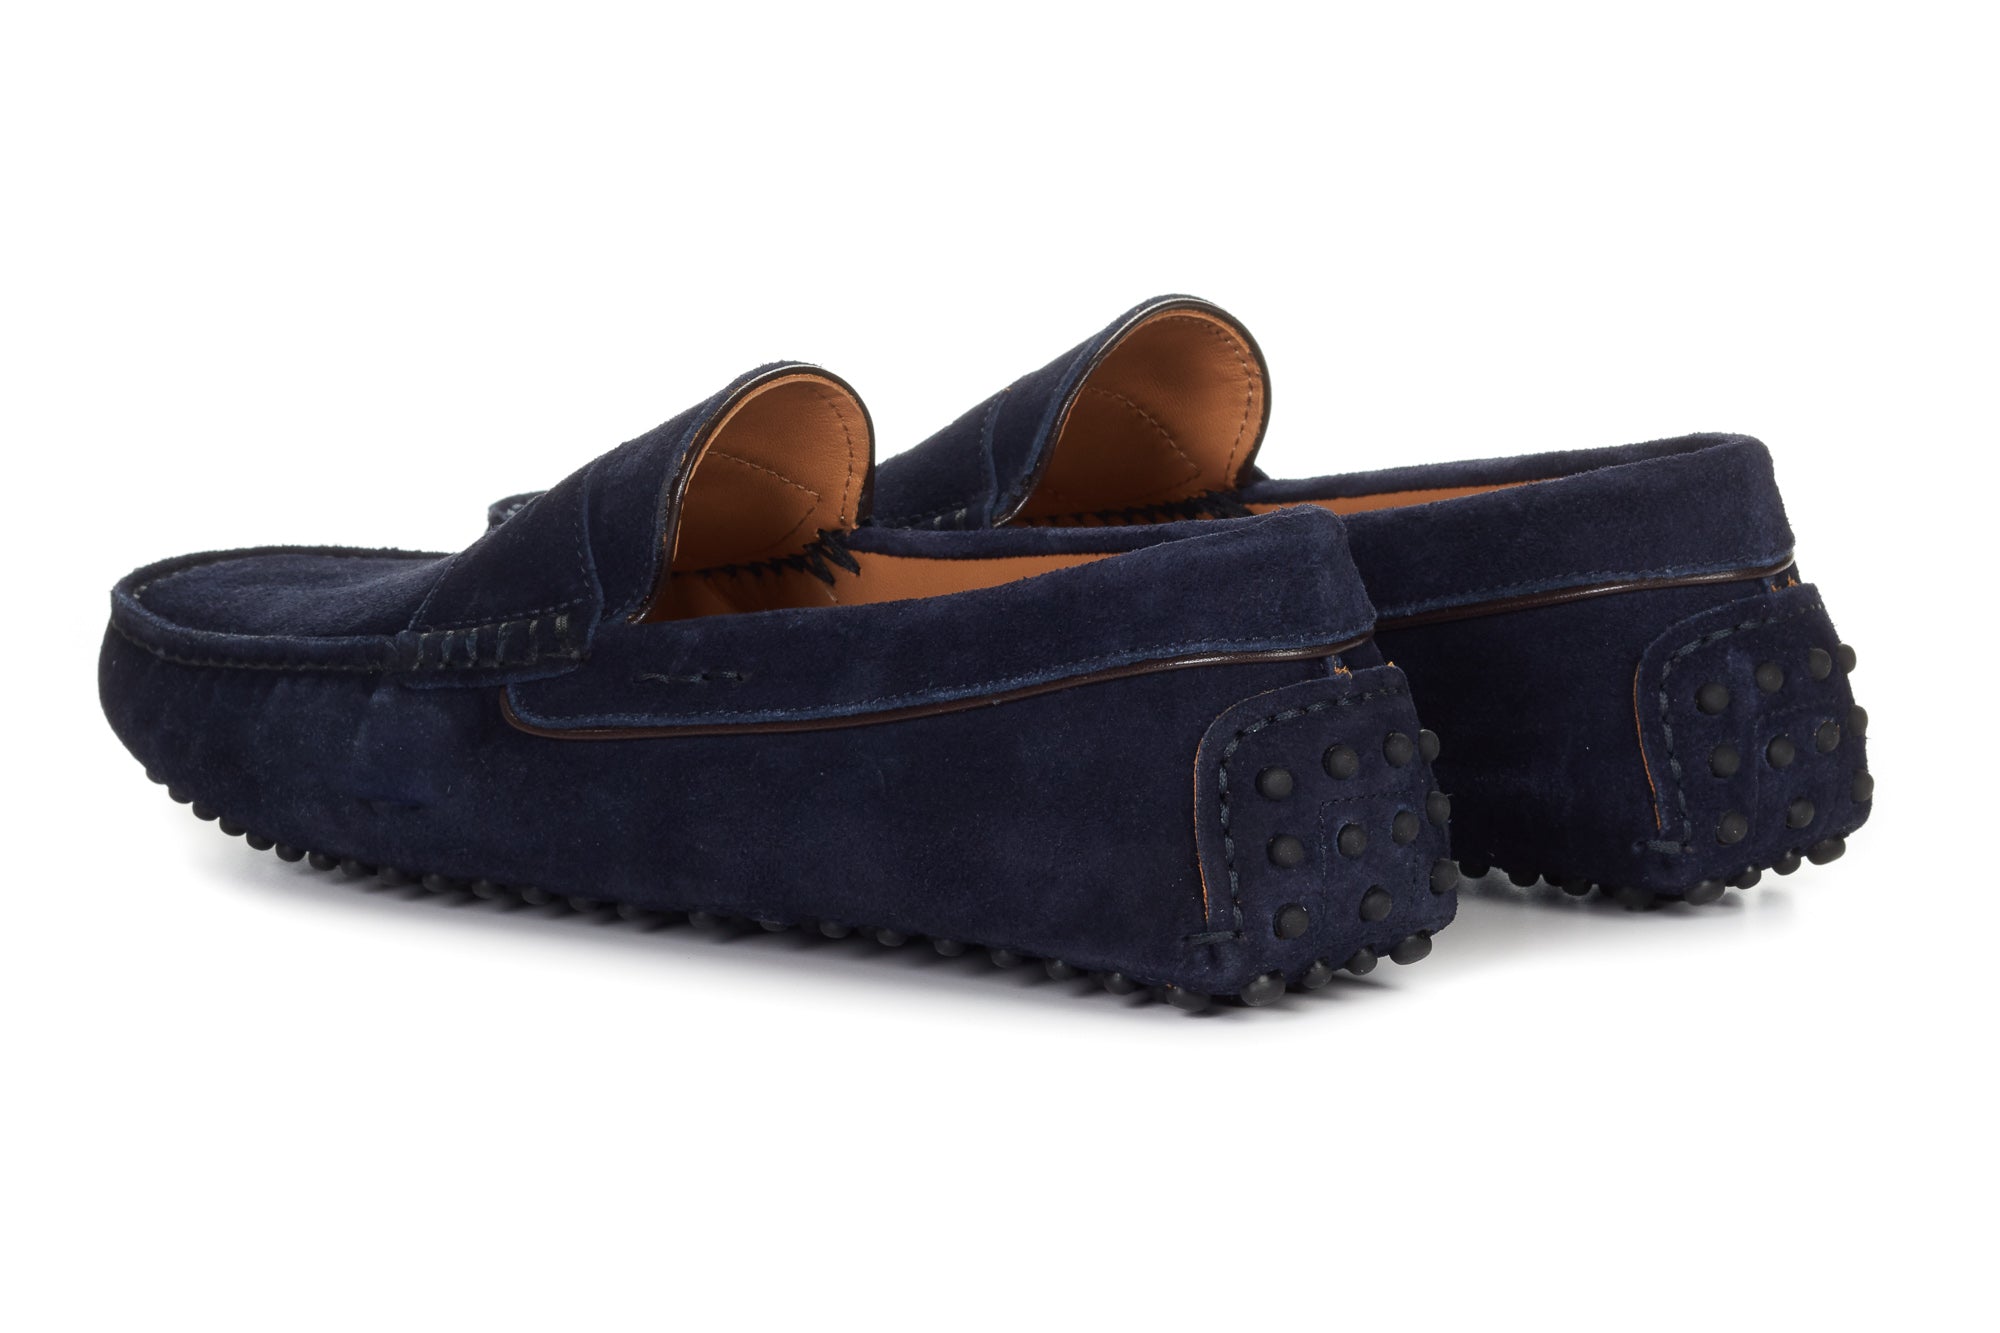 The McQueen Driving Loafer - Midnight Blue Suede